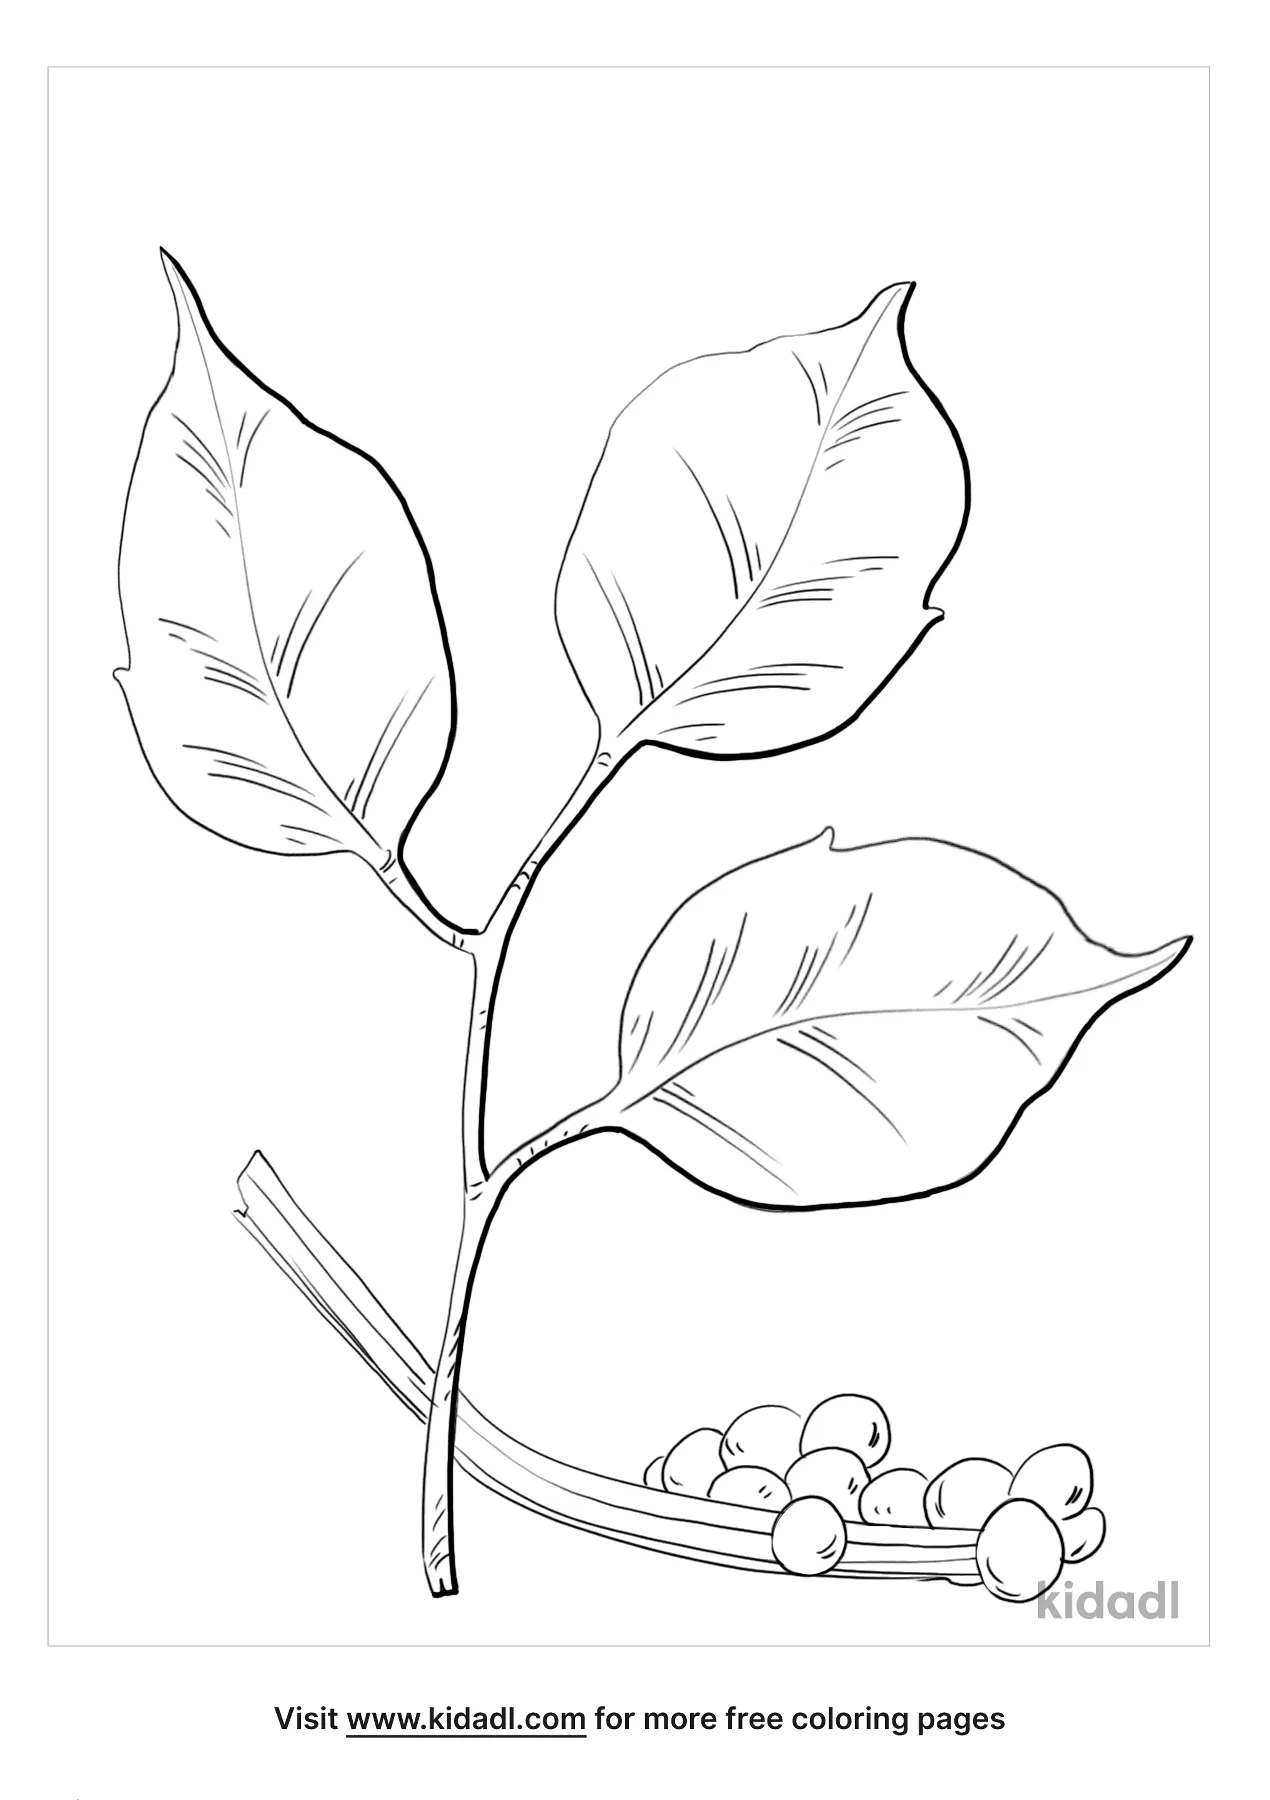 Free poison ivy coloring page coloring page printables